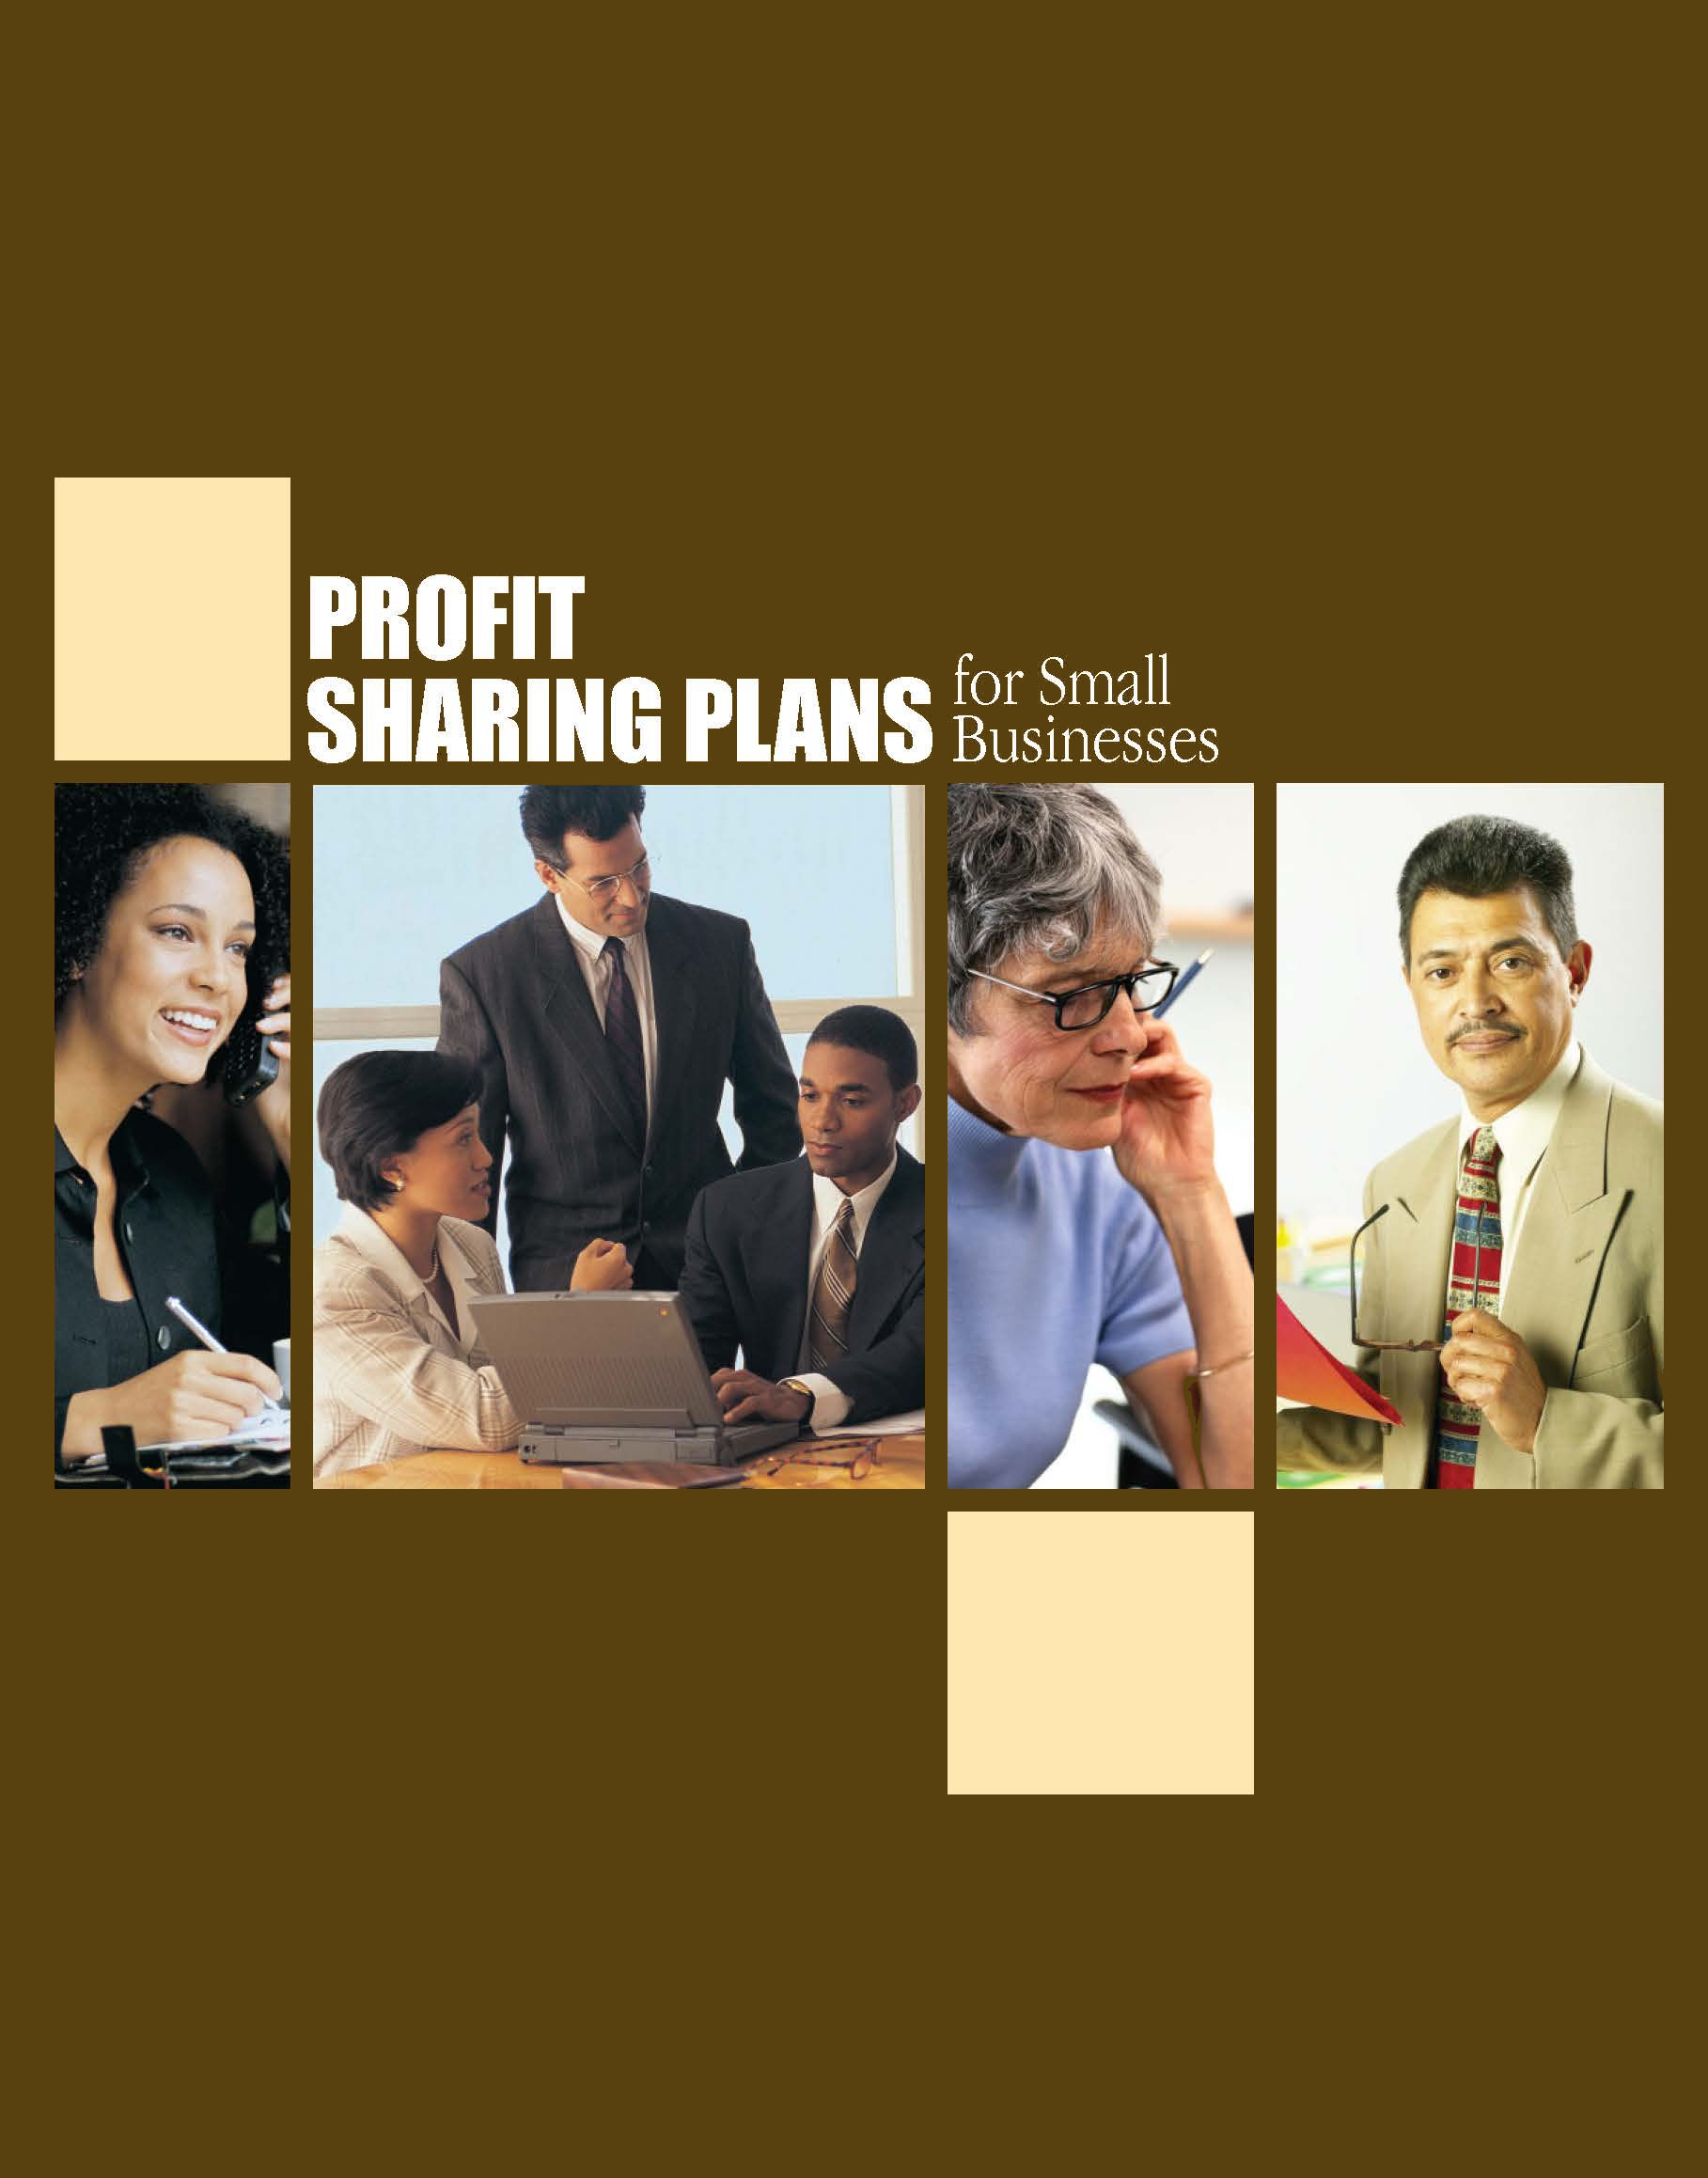 Profit Sharing Plans for Small Businesses.  To order copies call 1-866-444-3272.